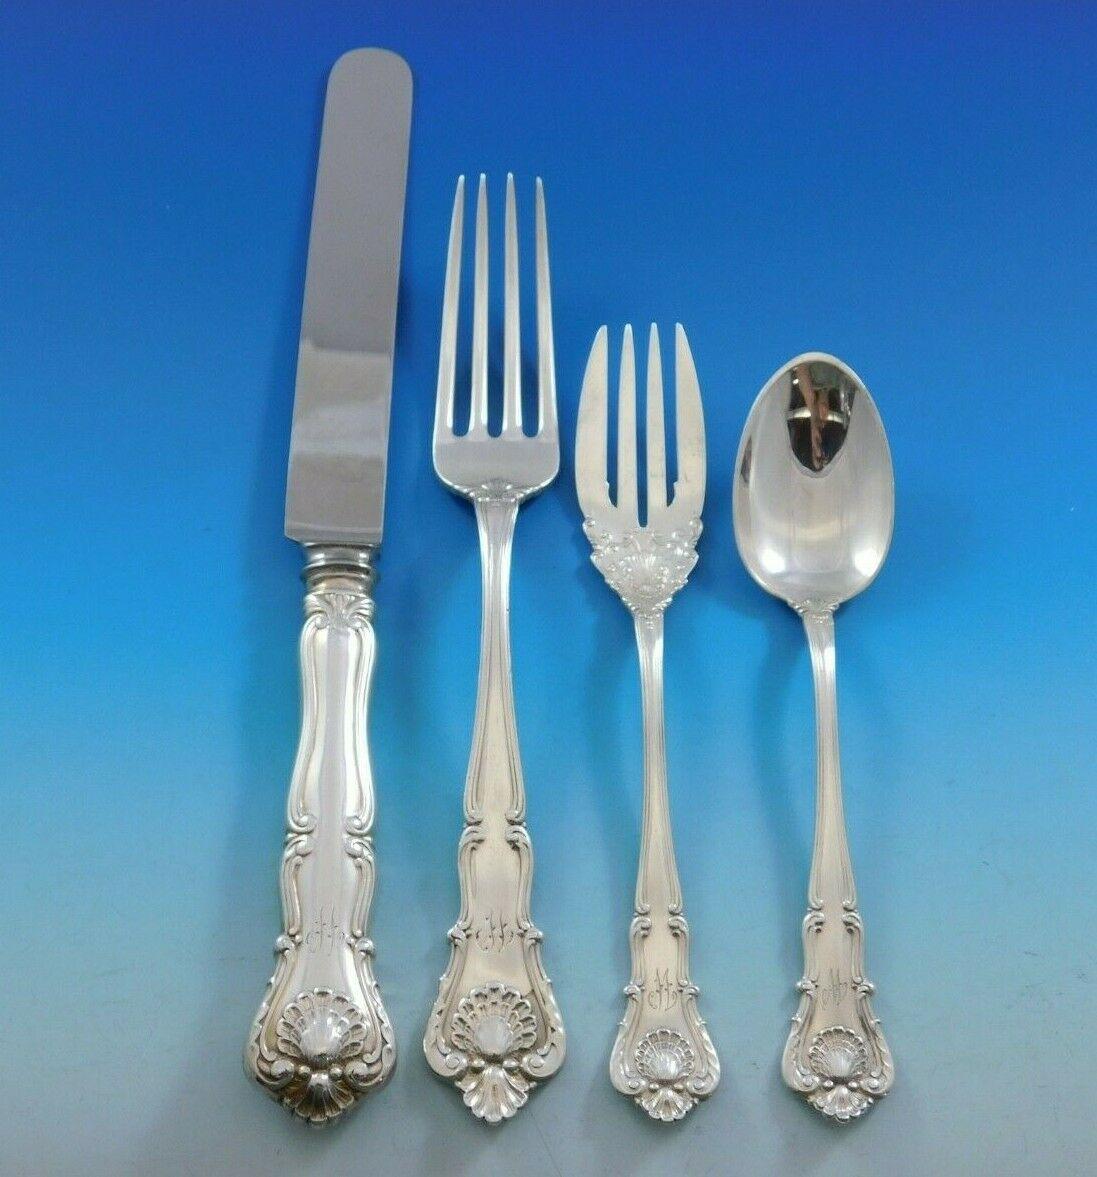 our table cecil flatware